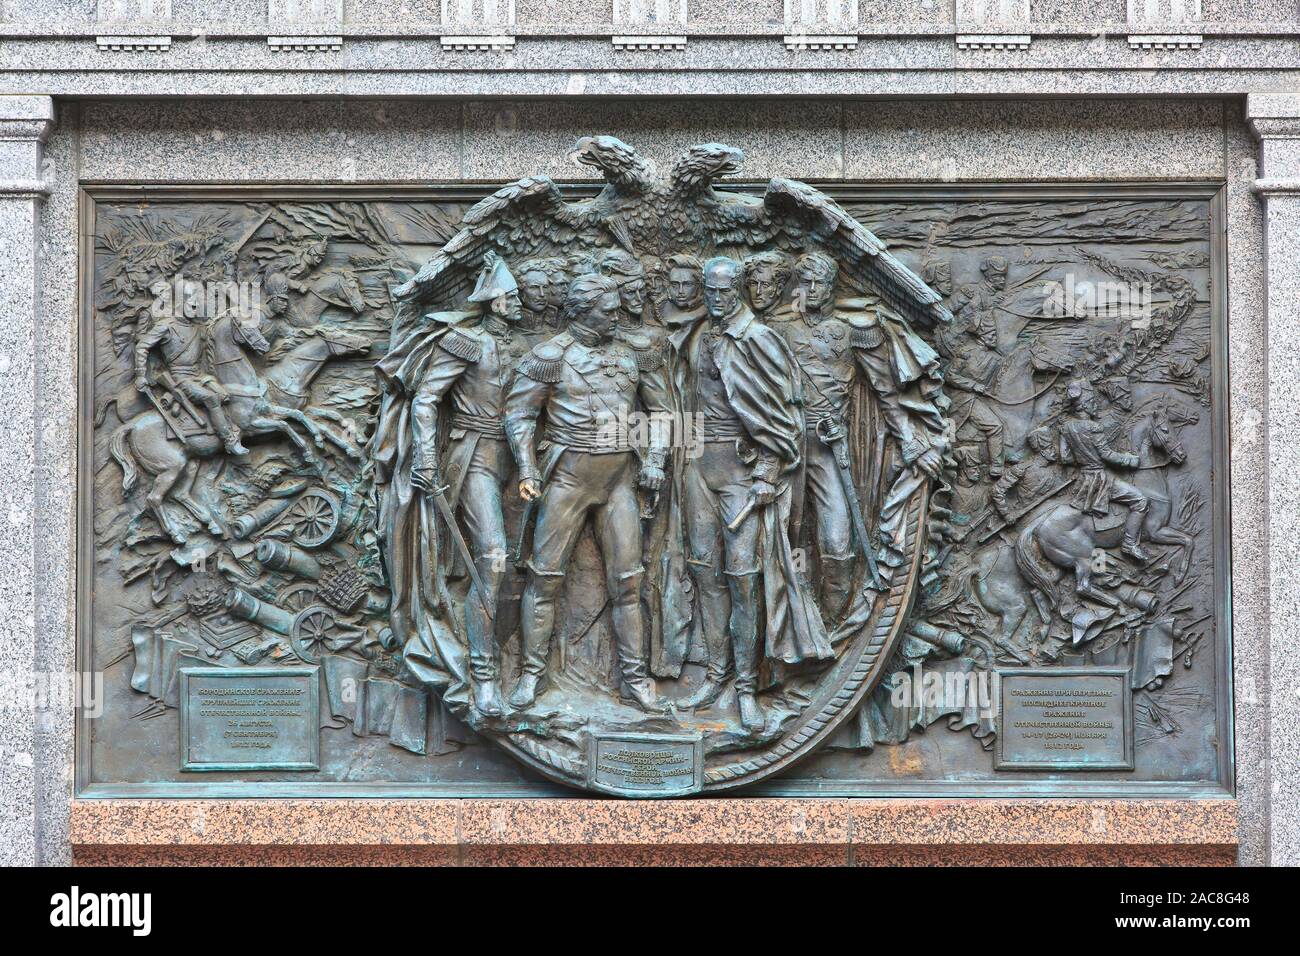 Bas-relief of Tsar Alexander I of Russia's generals Mikhail Kutuzov, Michael Barclay de Tolly & Pyotr Bagration at Alexander Garden in Moscow, Russia Stock Photo